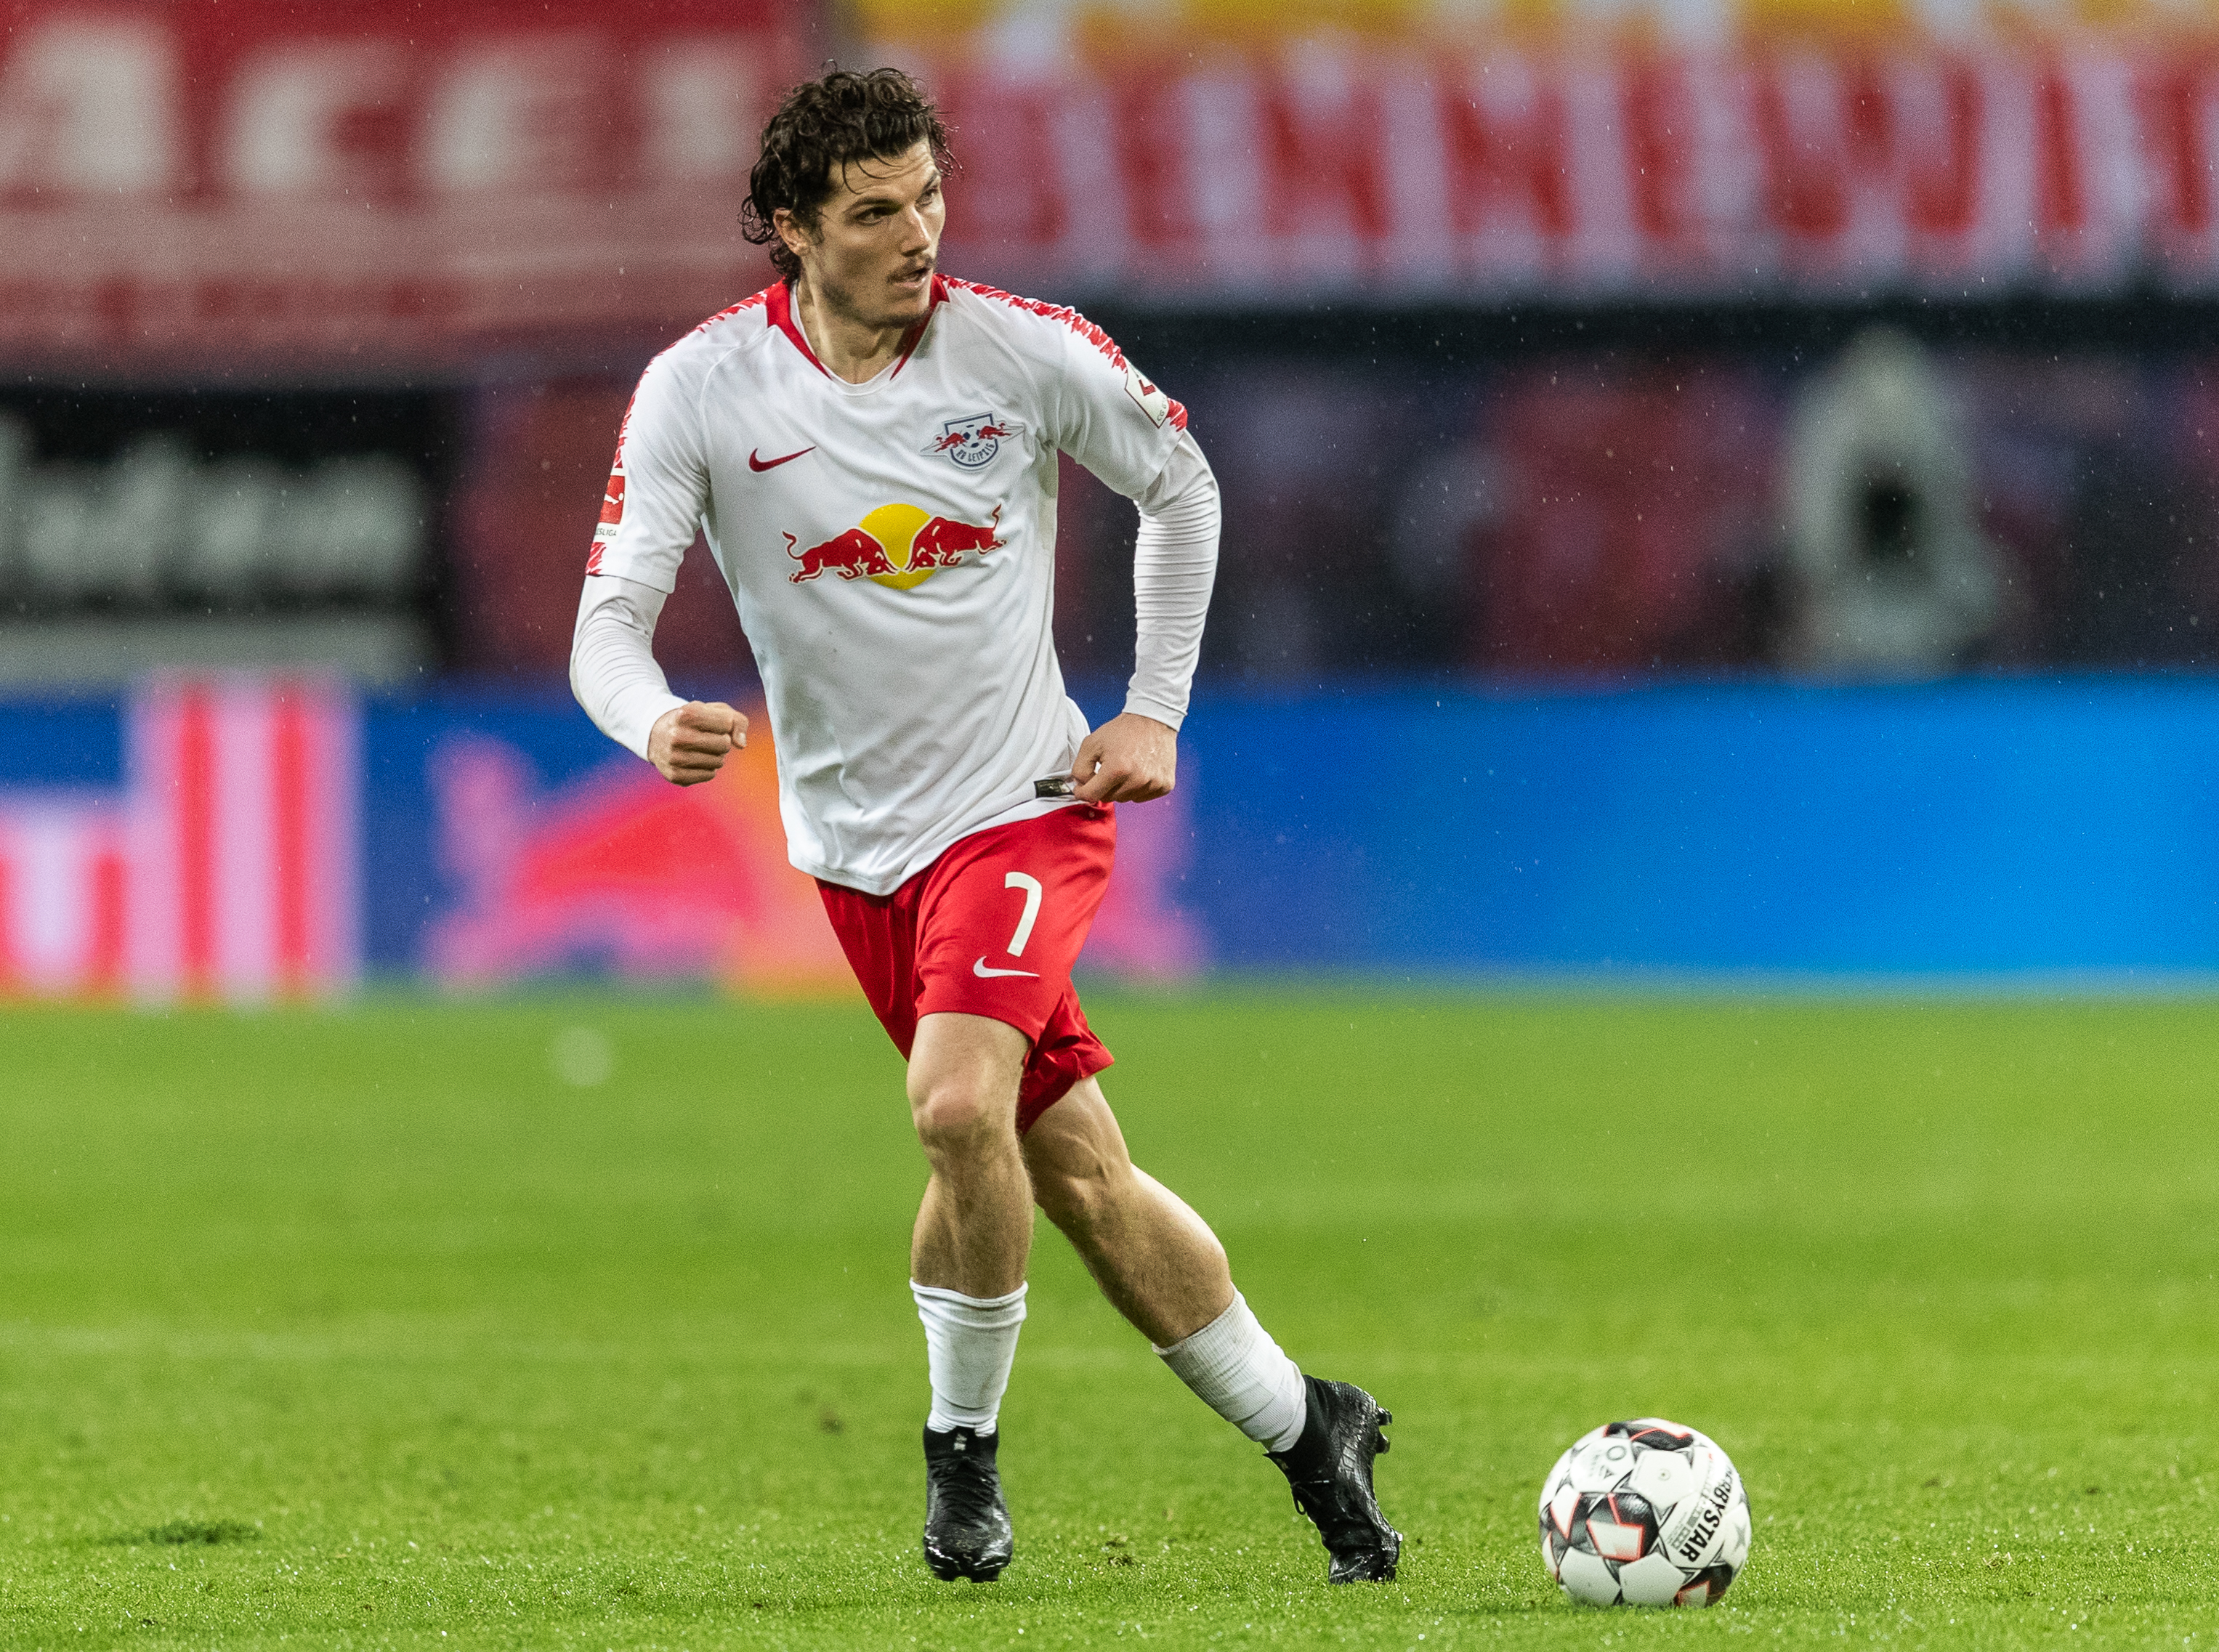 Marcel Sabitzer has been brilliant this season for Leipzig (Photo by Boris Streubel/Bongarts/Getty Images)